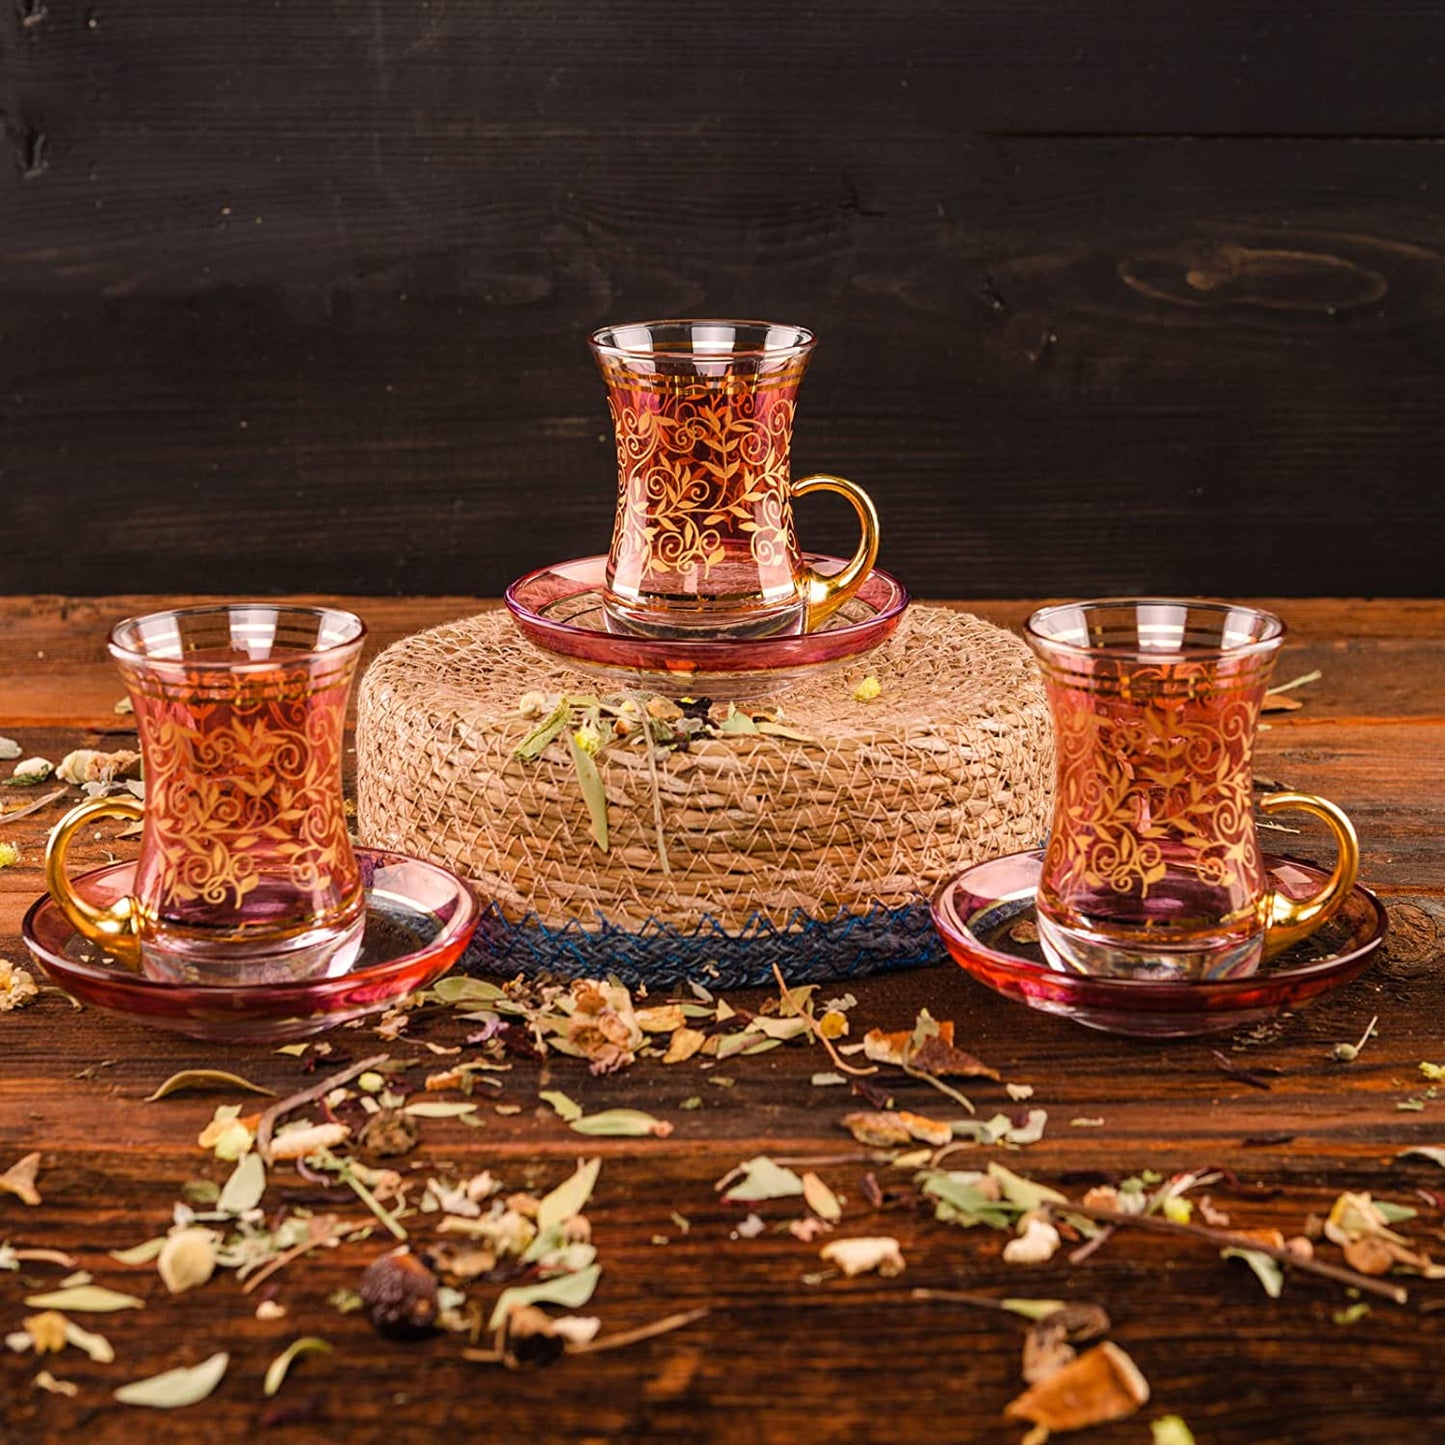 GOLDEN HORN Turkish Tea Set with 22k Gold Carved Tea Cups and Saucers - 6 Tea Glass 3.45 floz(100 ml) Each and 6 Glass Painted Saucers - Packaged in a Special Gift Box Tea Cup Sets (Yellow)